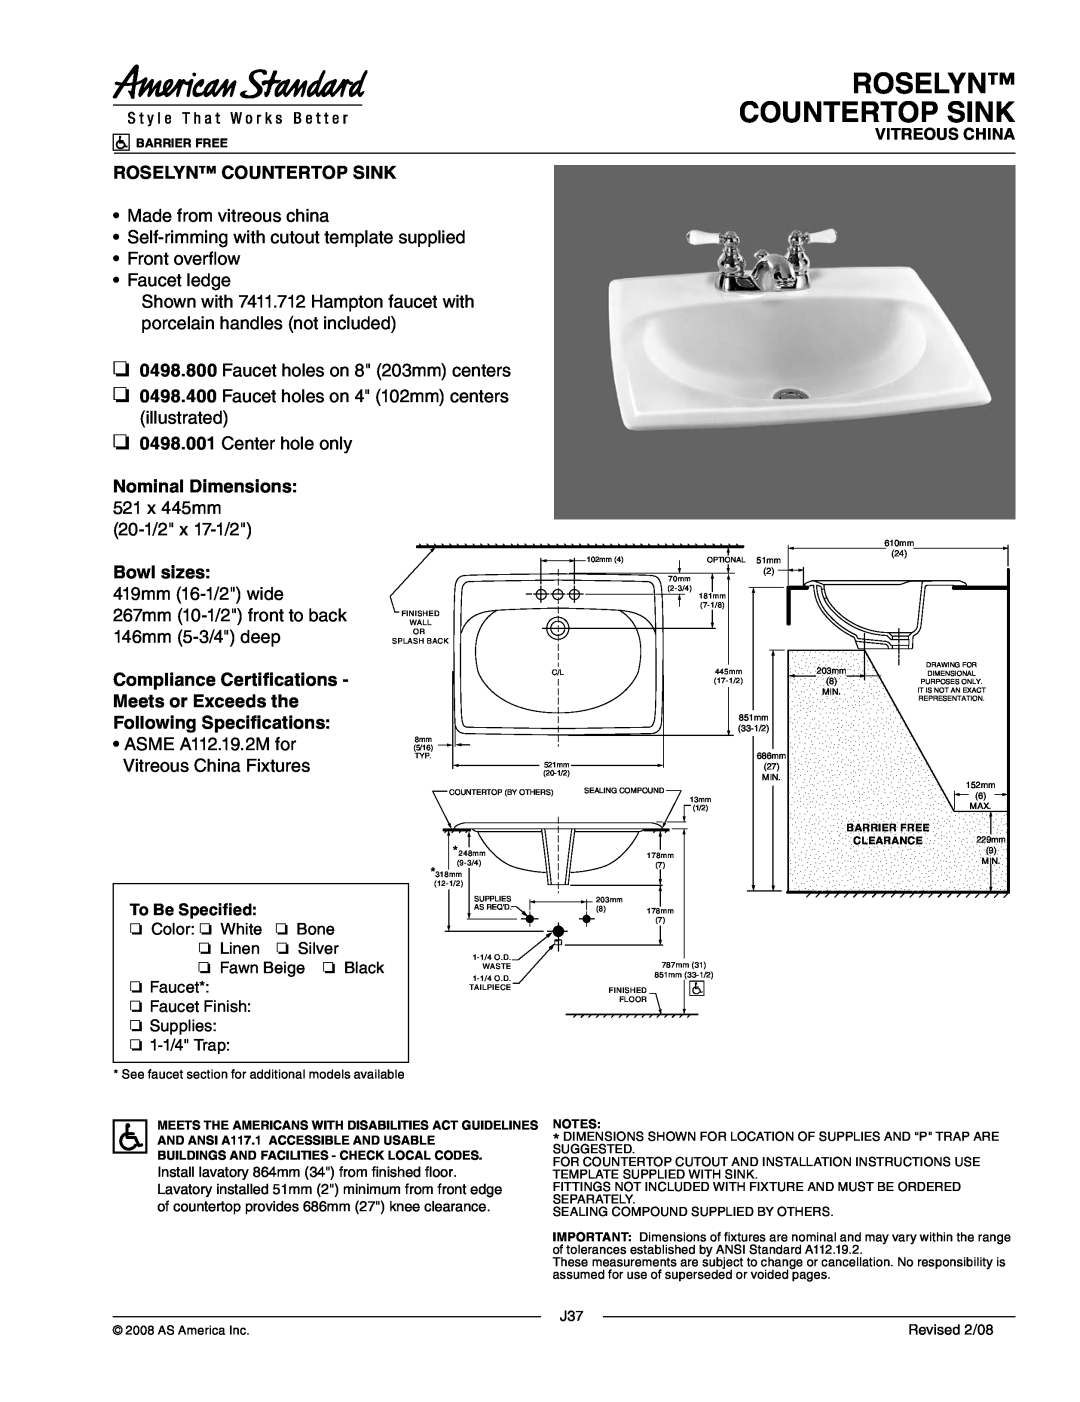 American Standard 0498.400, 0498.001 dimensions Roselyn Countertop Sink, Nominal Dimensions 521 x 445mm, Bowl sizes 